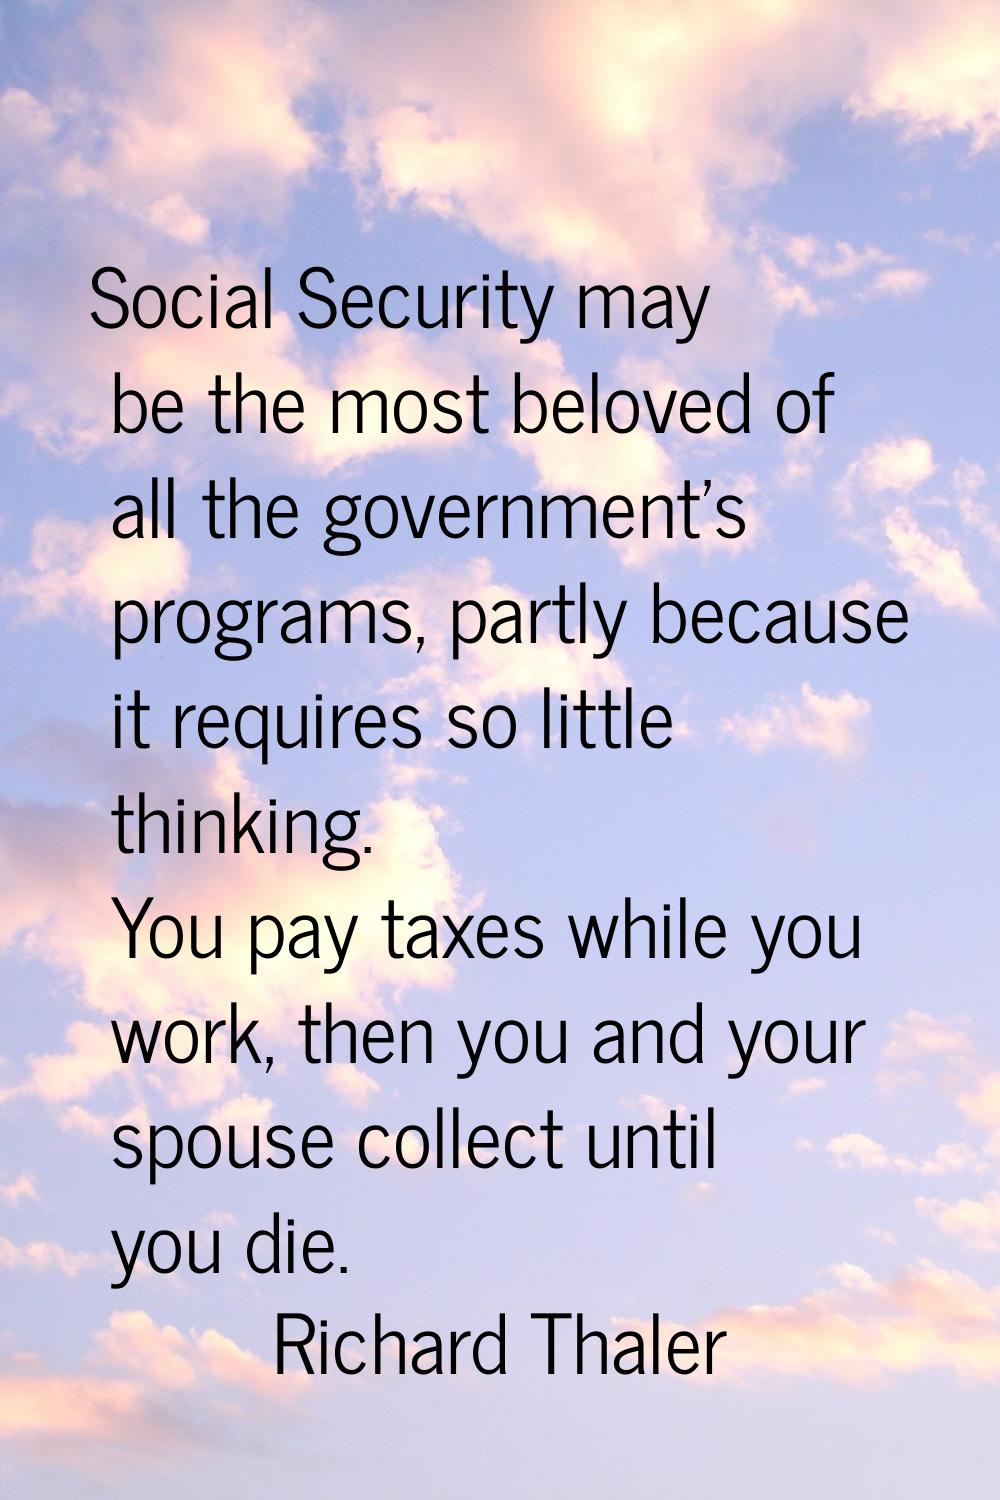 Social Security may be the most beloved of all the government's programs, partly because it require